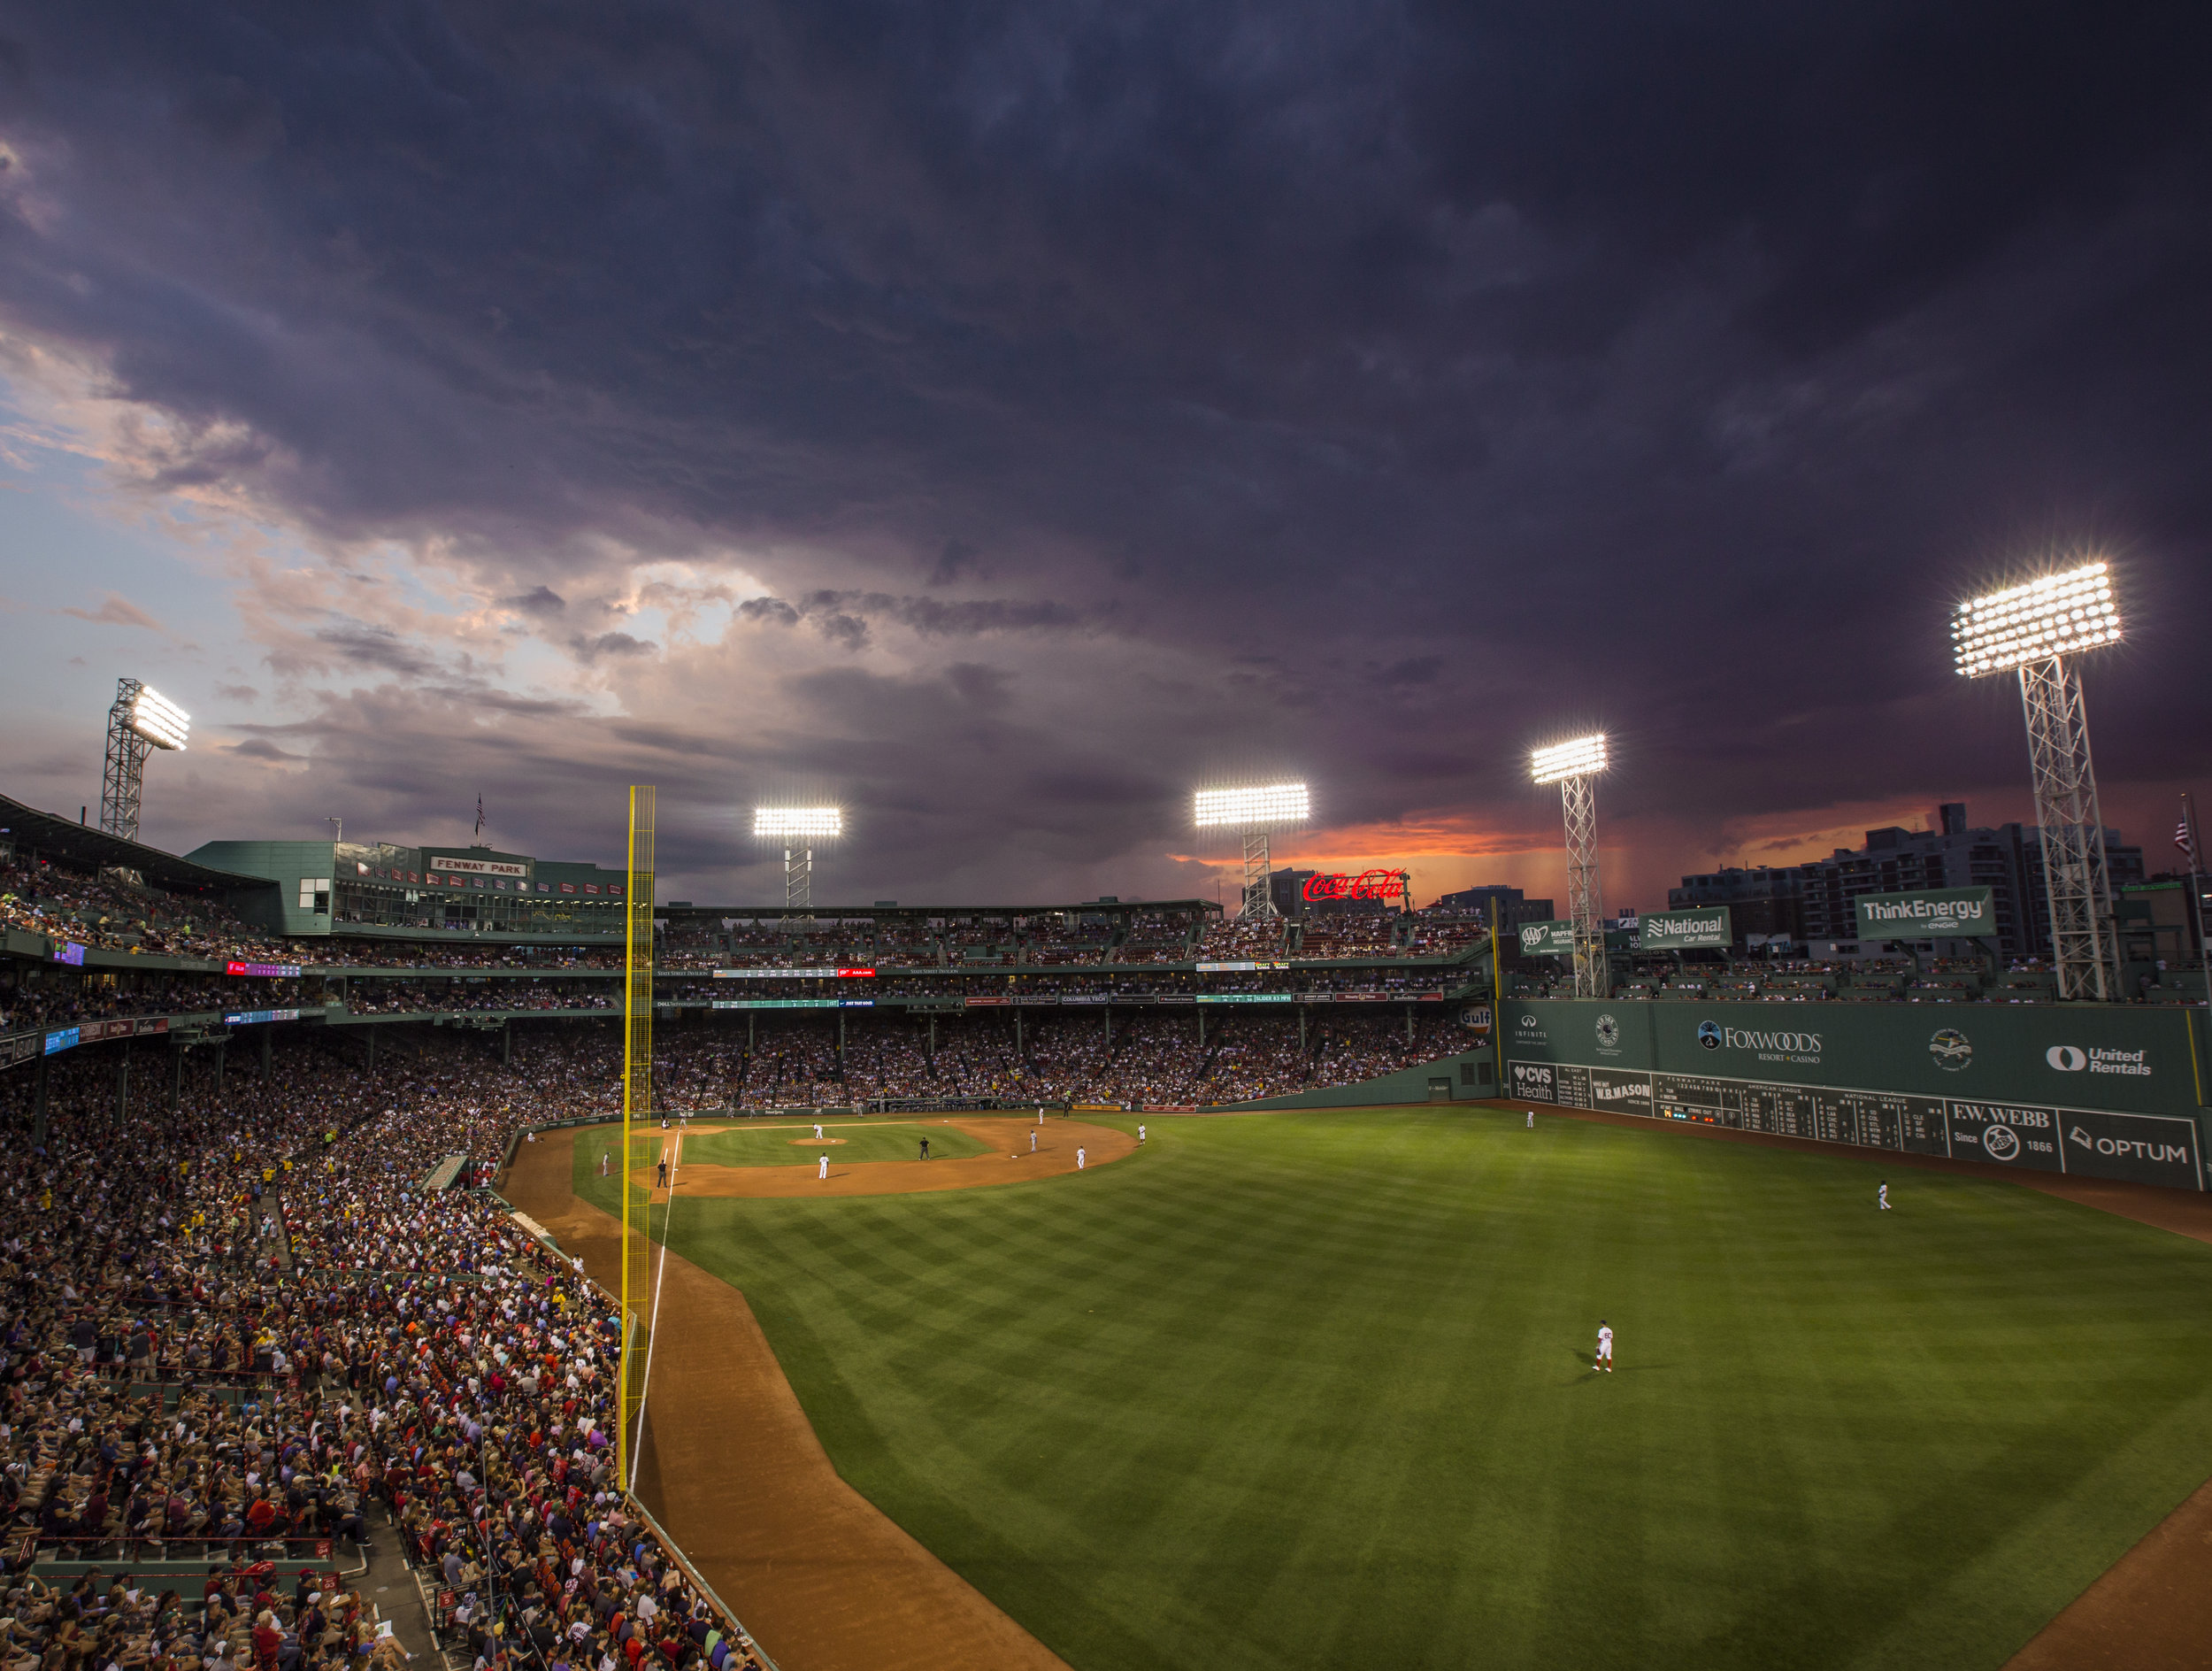 Sunset and Clouds over Fenway